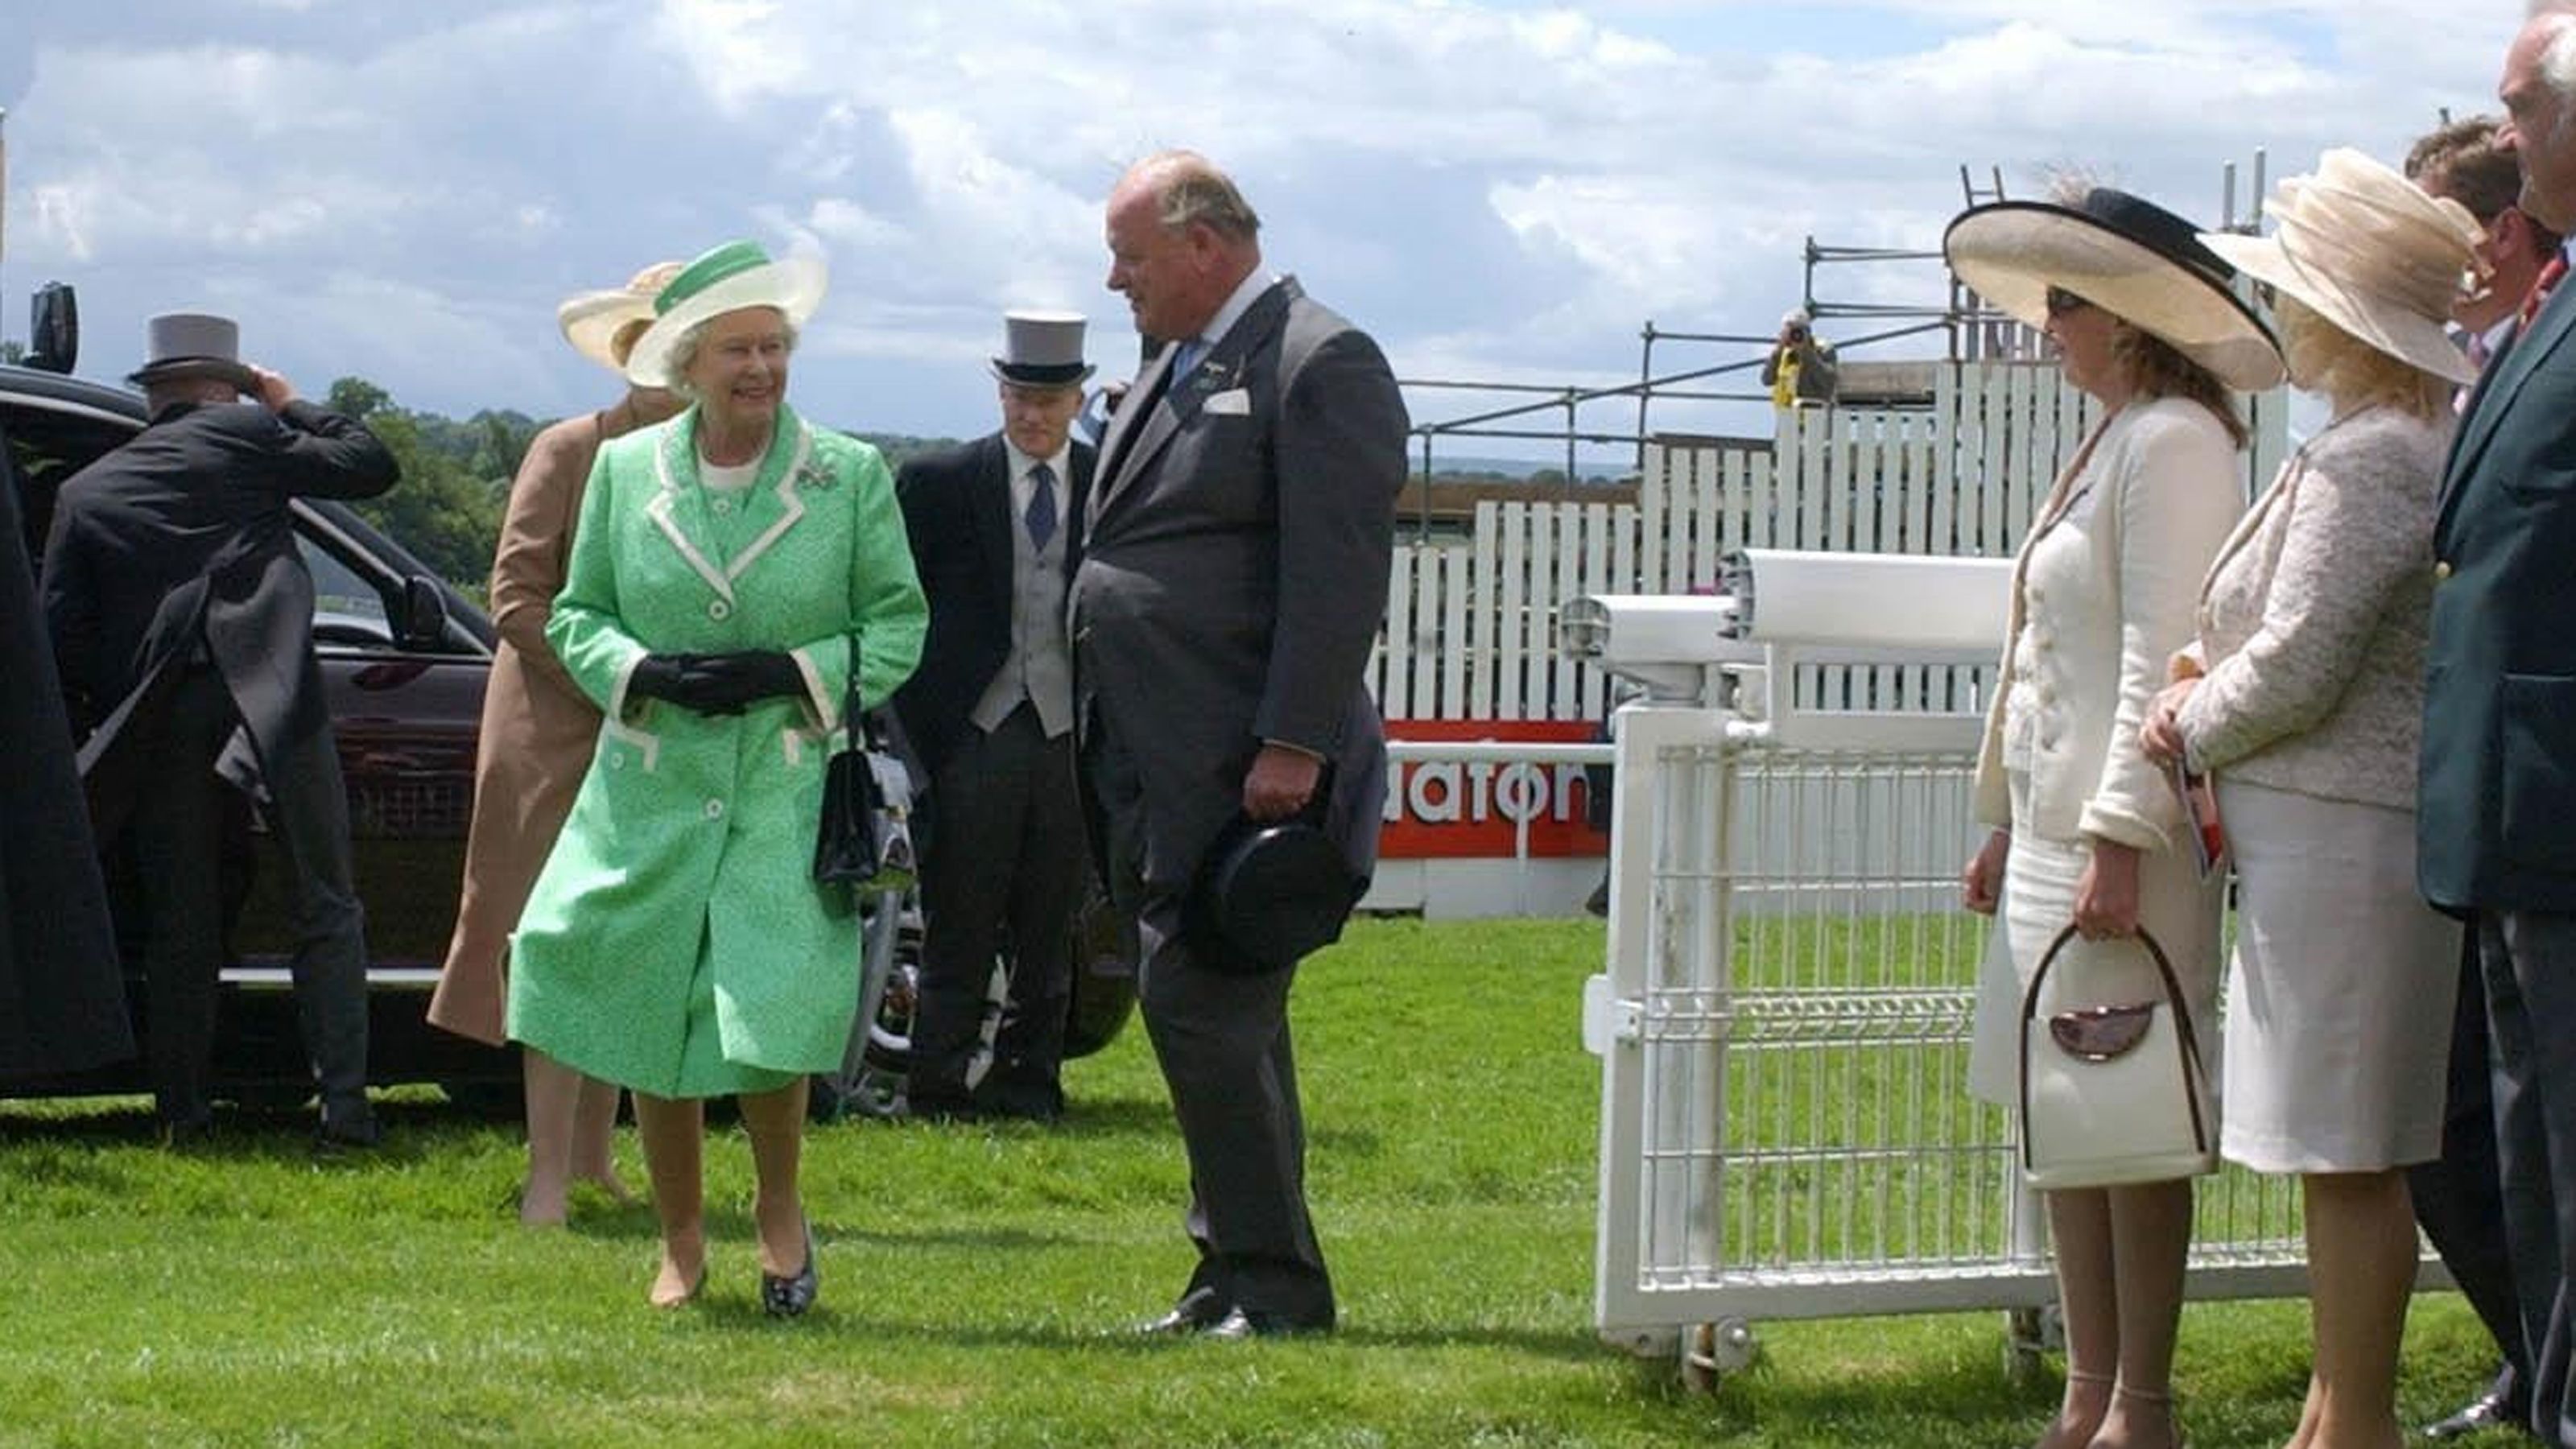 The Queen arrives at Epsom racecourse